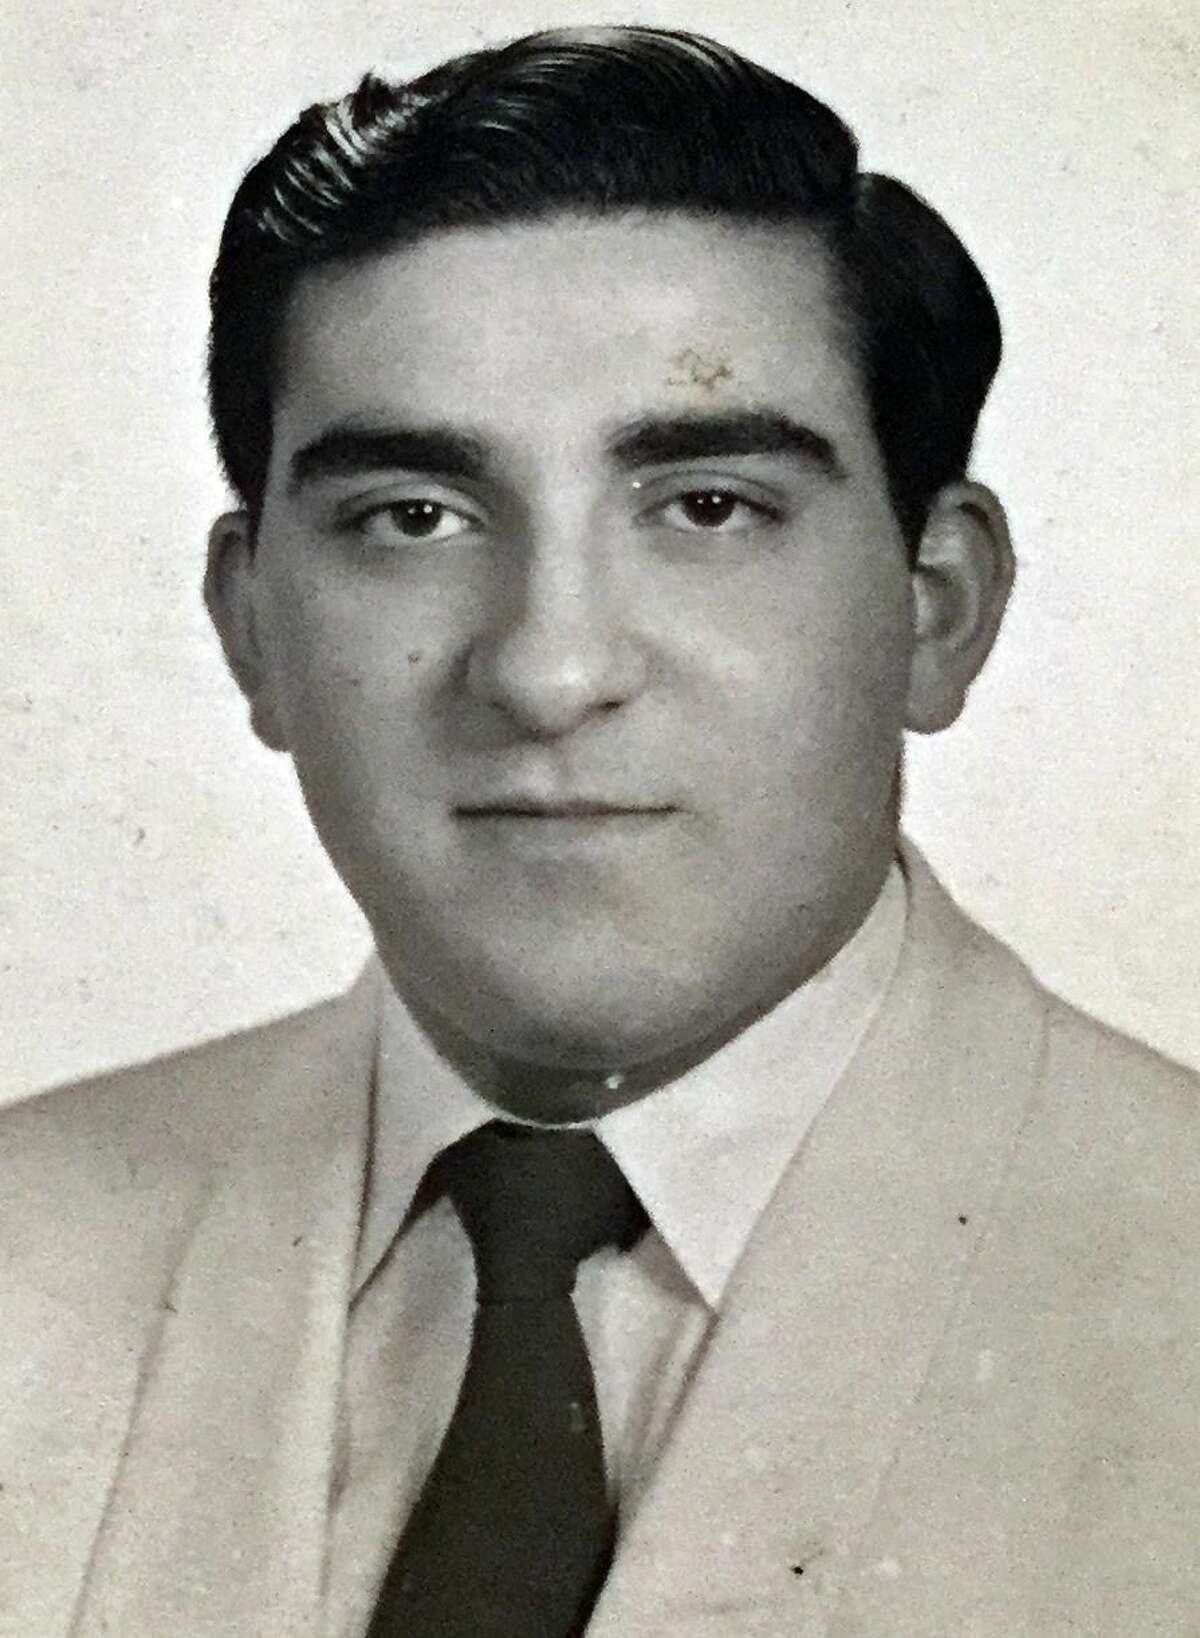 Young Frank Carrano’s high school yearbook photo.